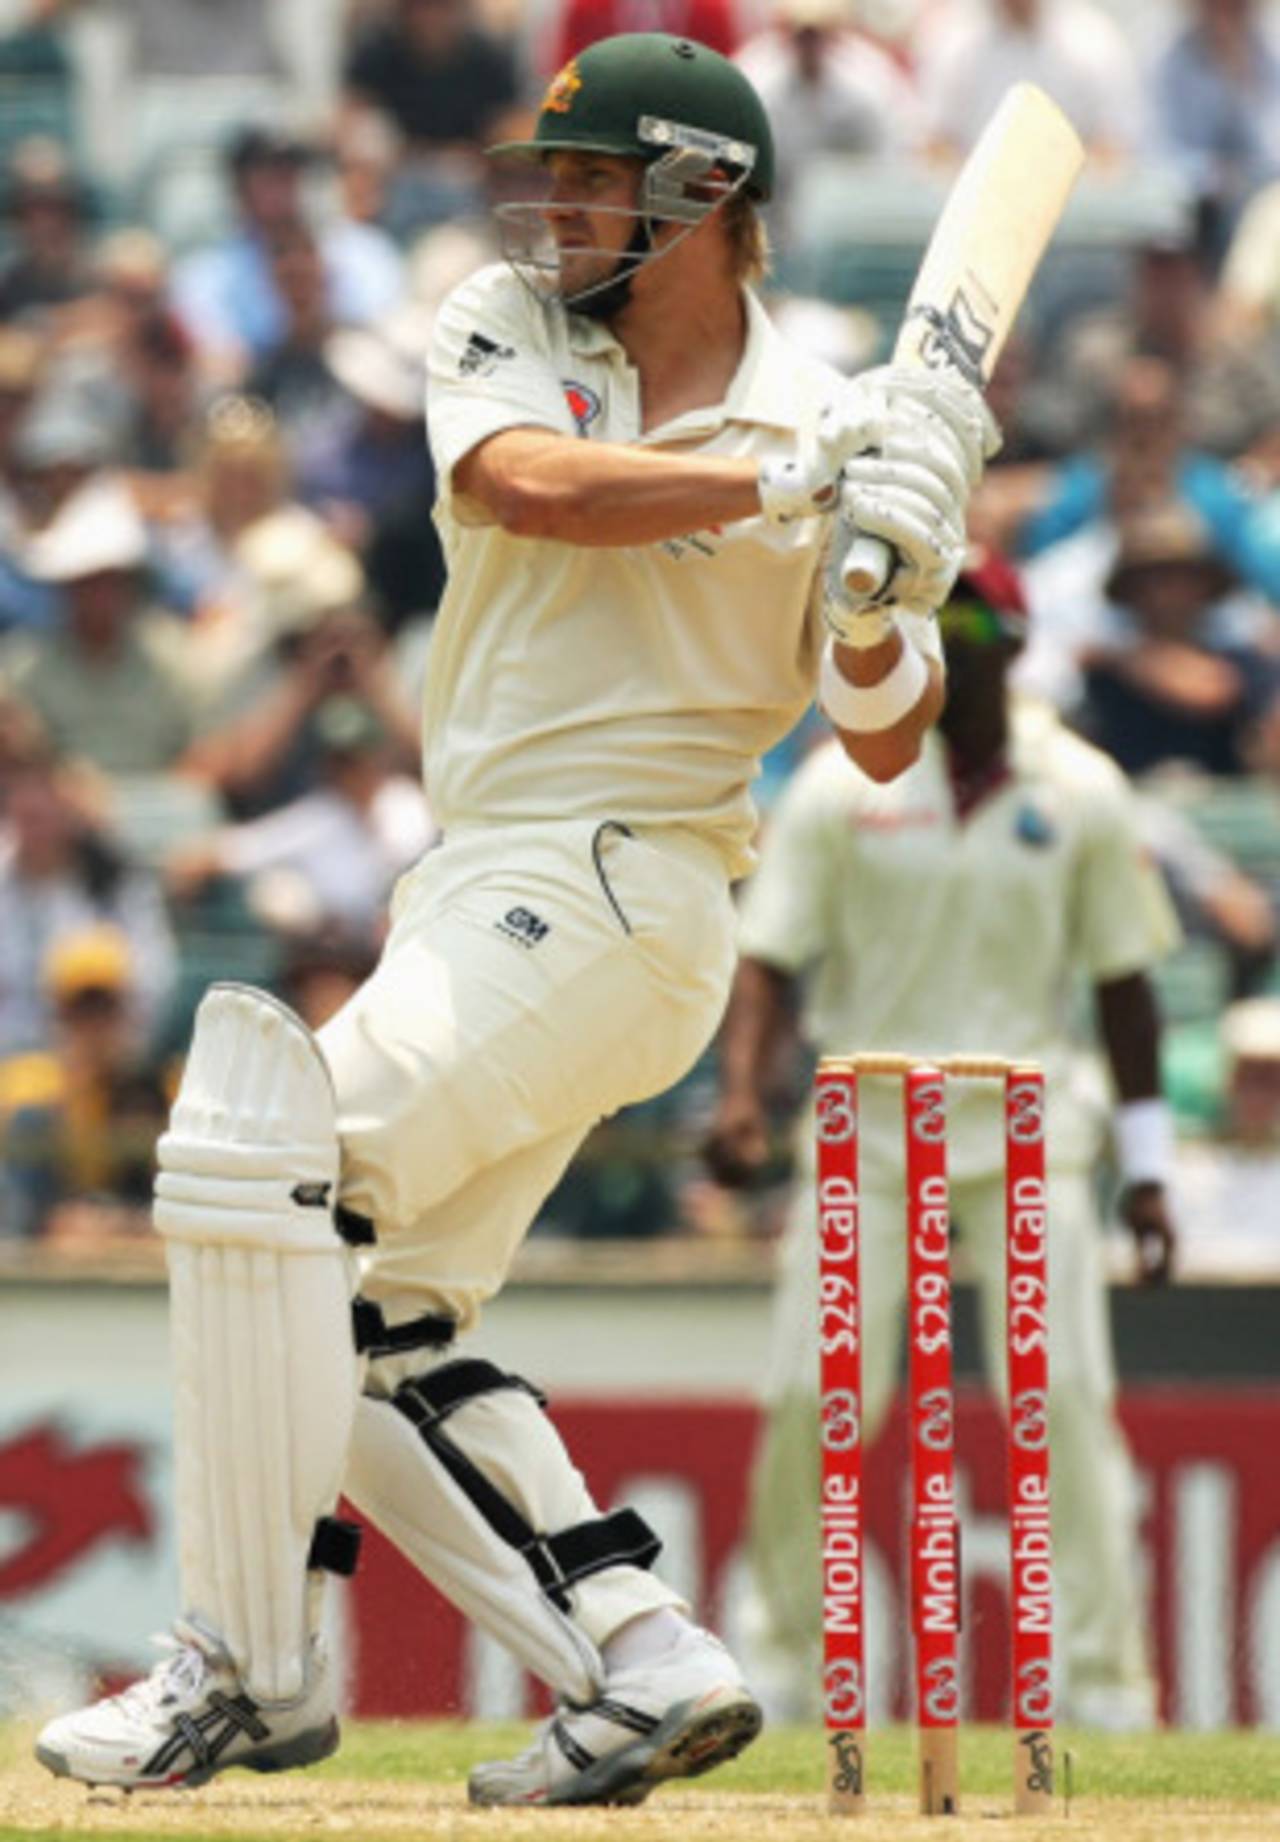 Shane Watson on the attack, Australia v West Indies, 3rd Test, Perth, 16 December 2009